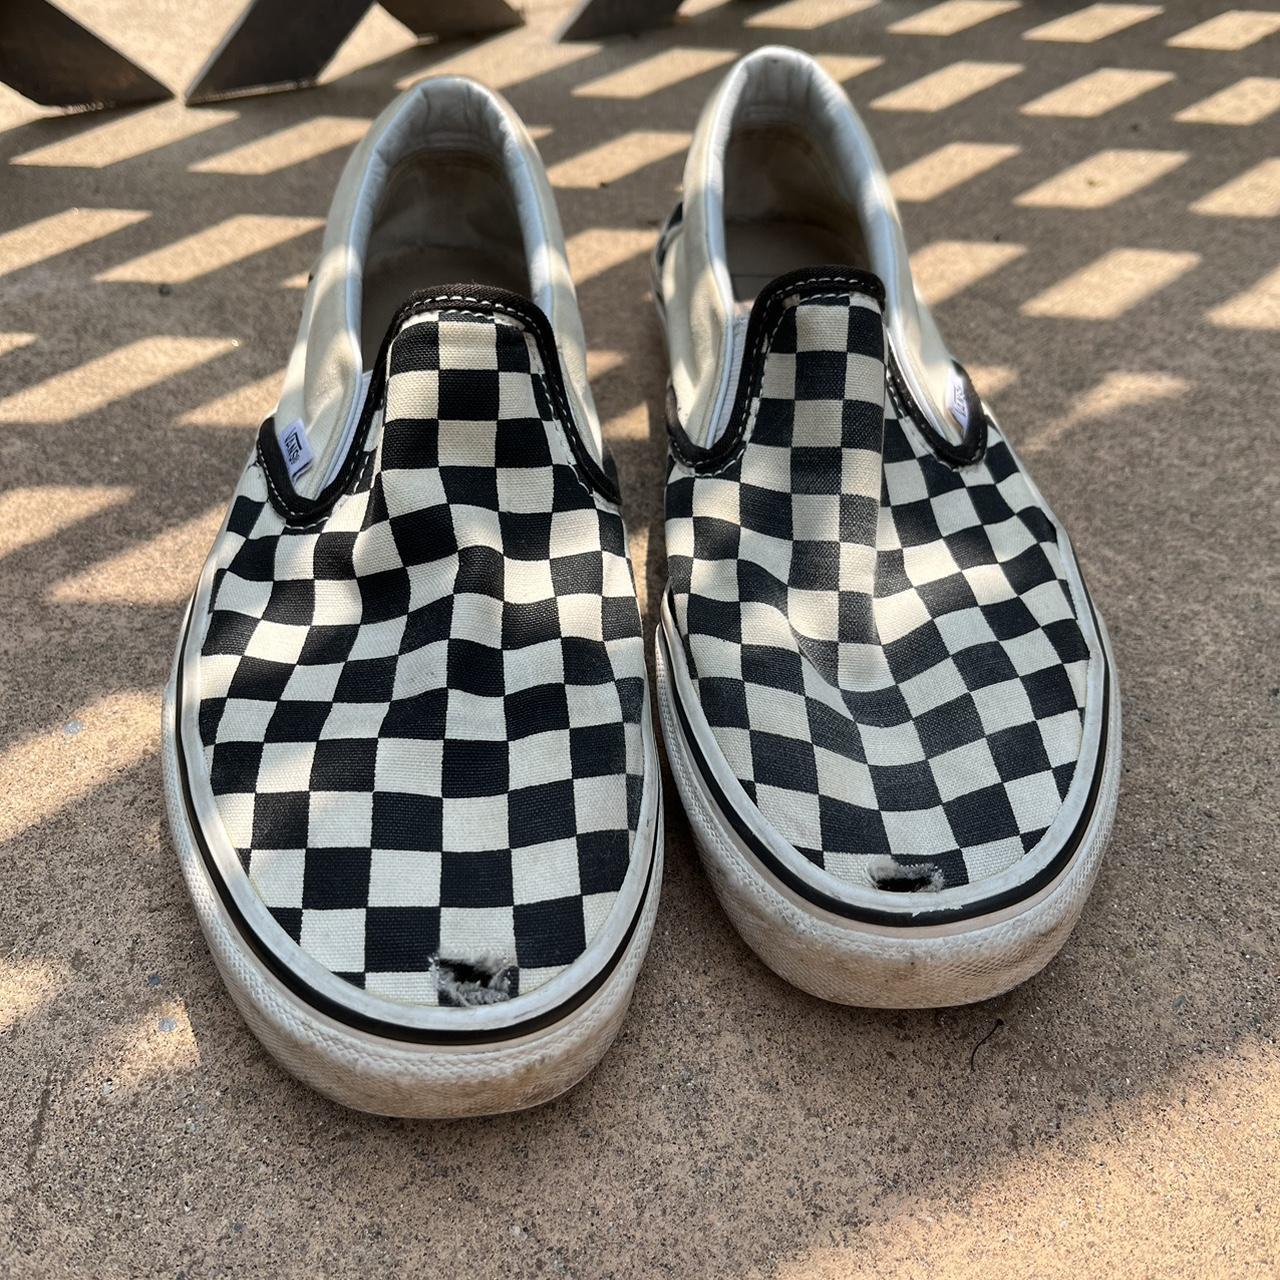 Vans Women's Black and White Trainers | Depop